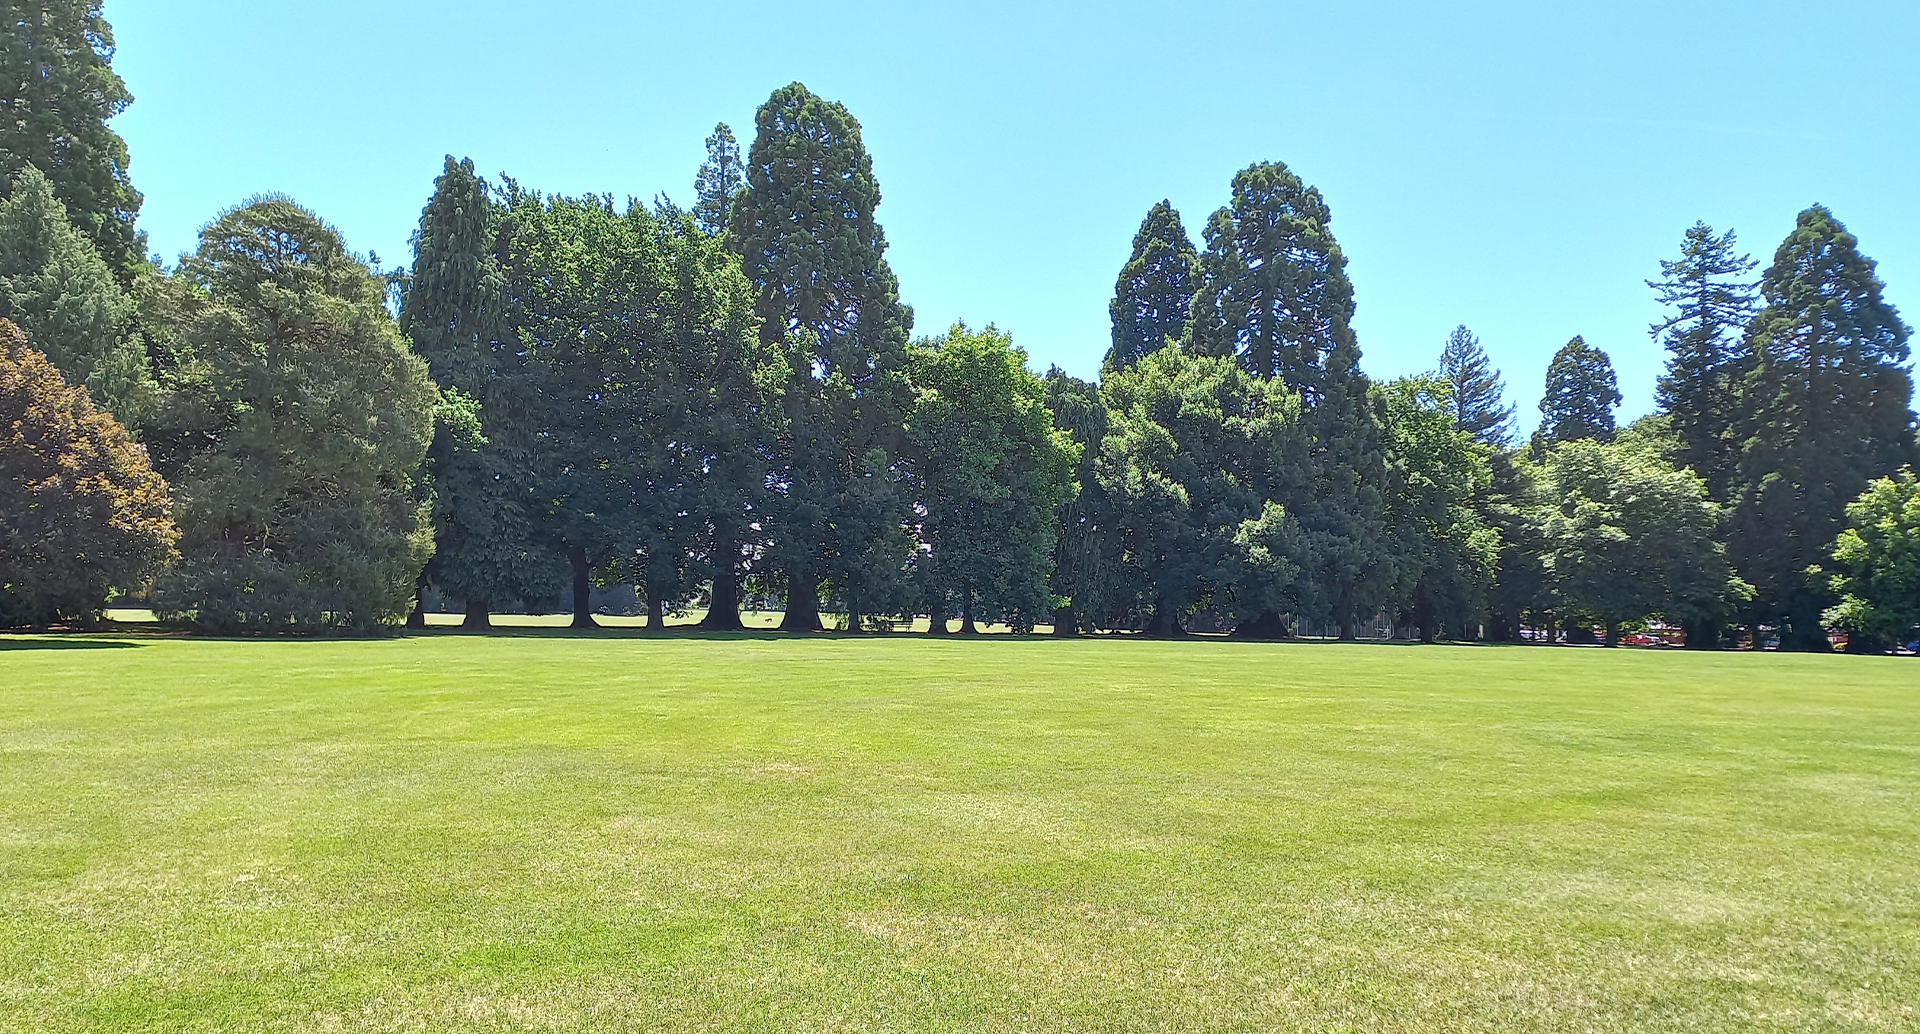 Large grass area with trees